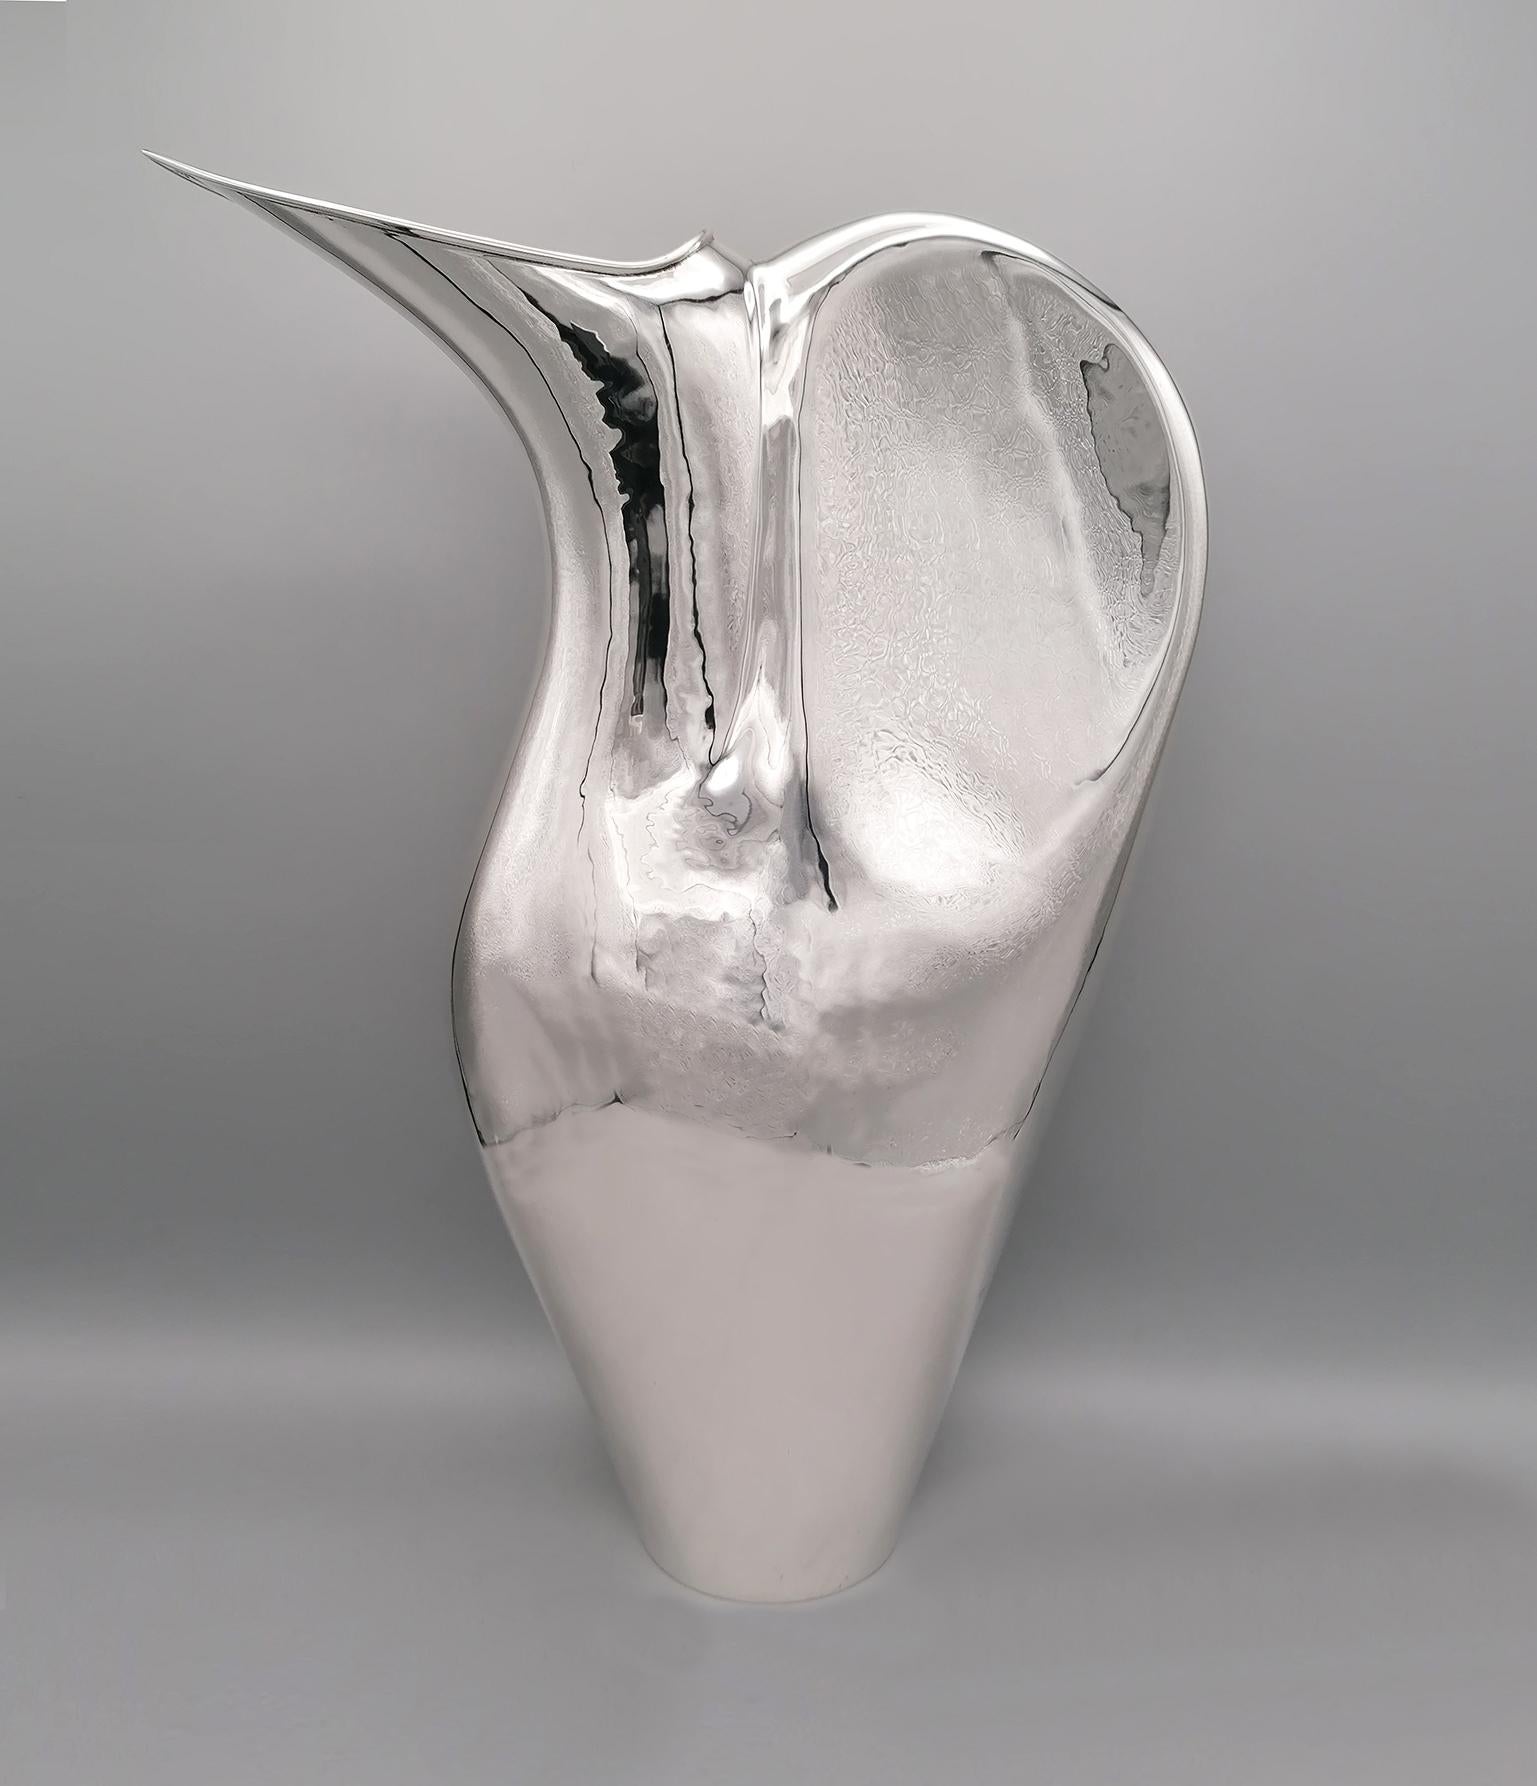 Modern jug-vase. Made of solid silver plate fully molded by hand.
The jug is inspired by the shape of the penguin.

Solid silver 800°°/°°°. 1,210 grams.